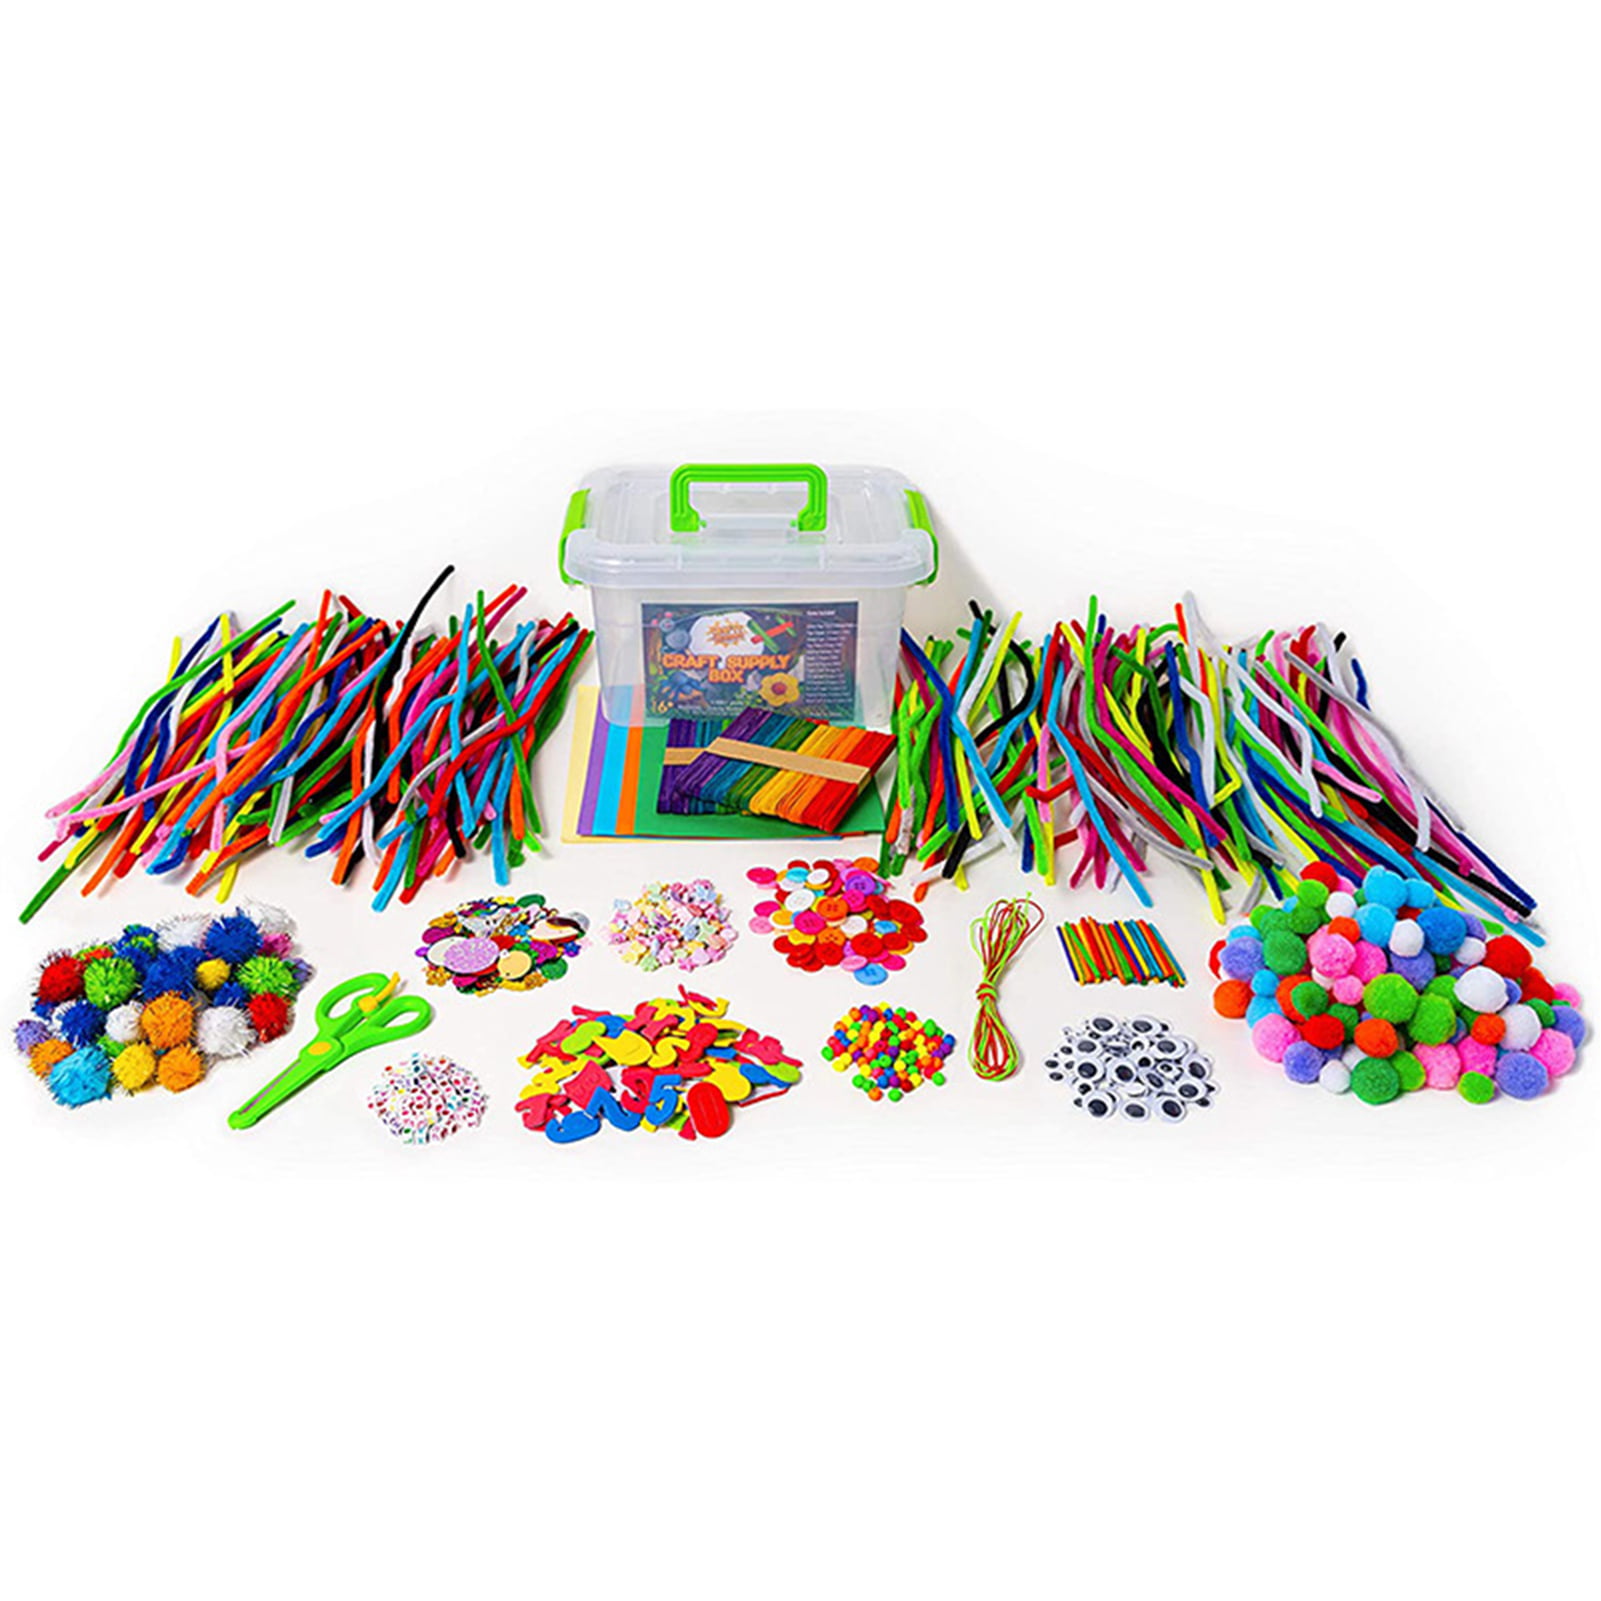 $9/mo - Finance Arts and Crafts Supplies for Kids, 2000+ Piece Craft Kits  Library in Craft Box, Crafting Supplies Set for Kids Ages 4, 5, 6, 7, 8, 9,  10, 11 &12